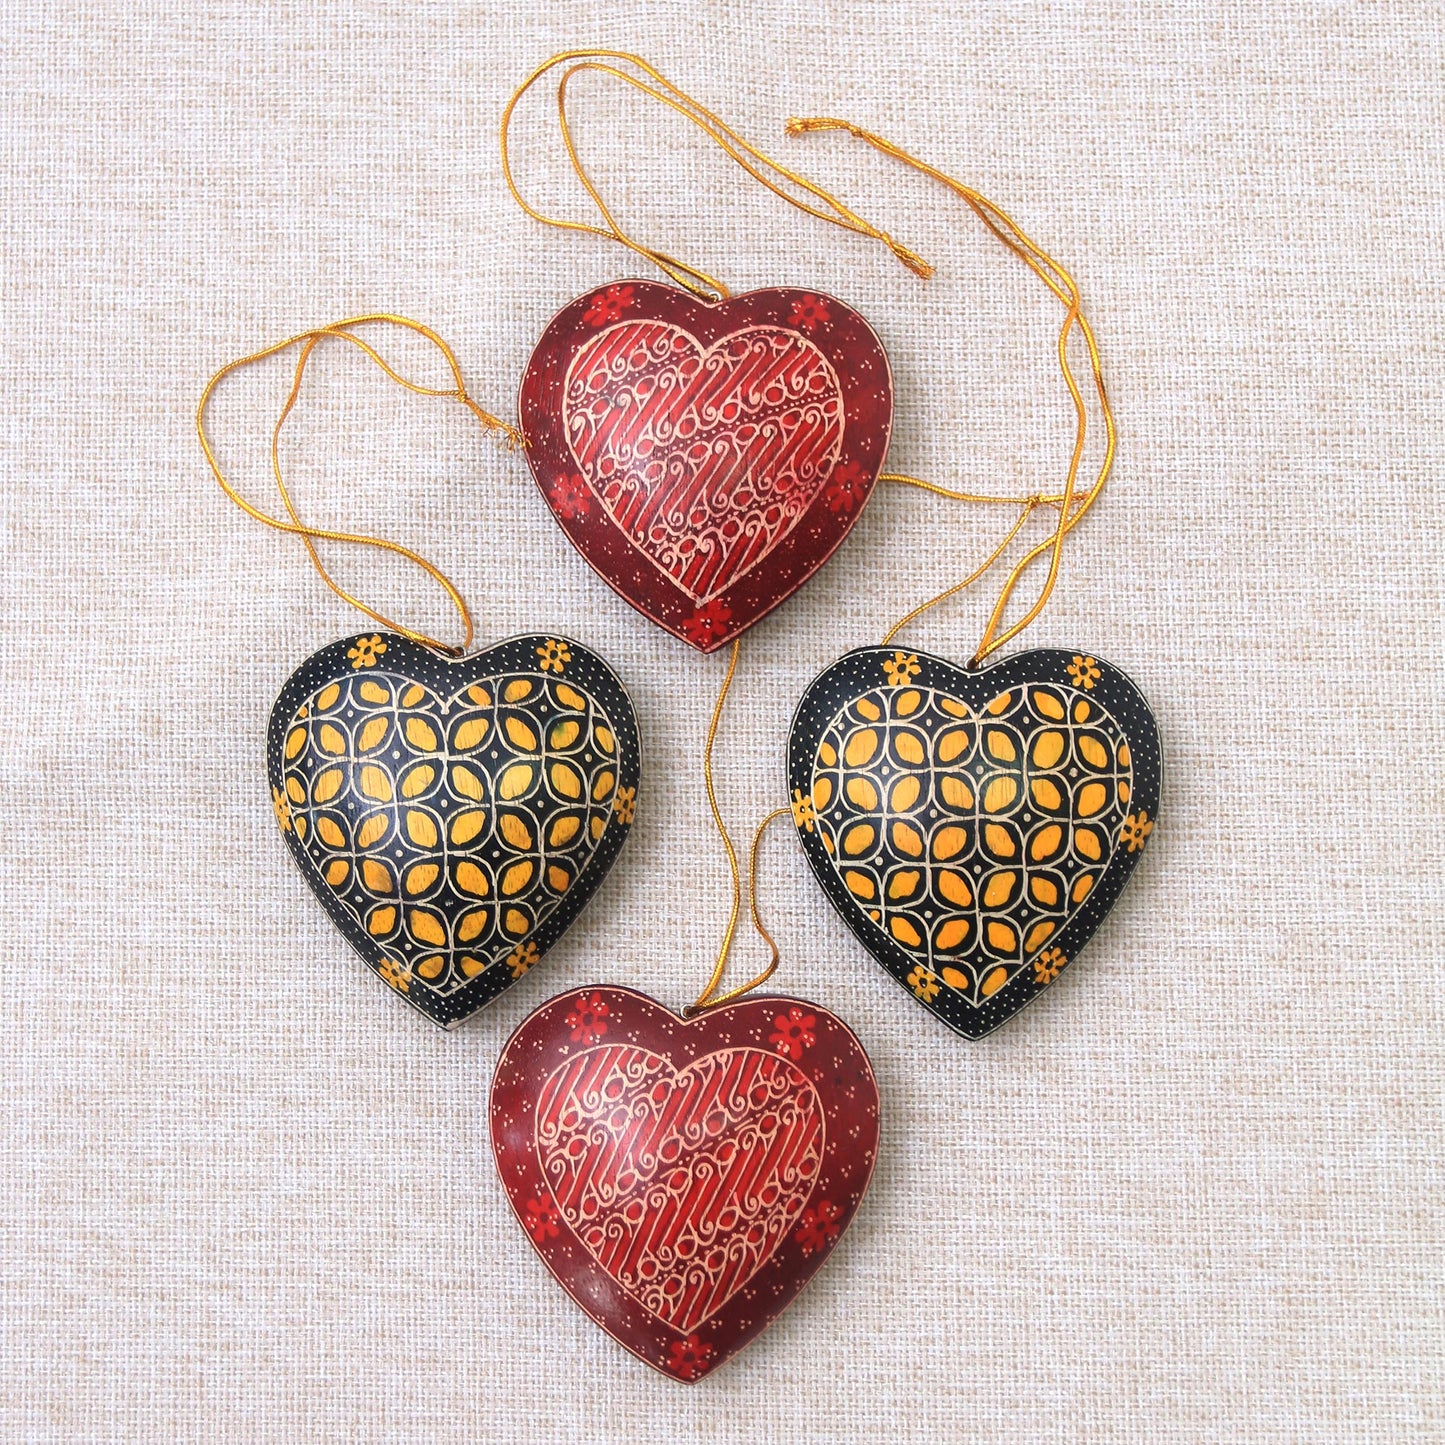 Traditional Hearts Traditional Batik Wood Heart Ornaments from Java (Set of 4)